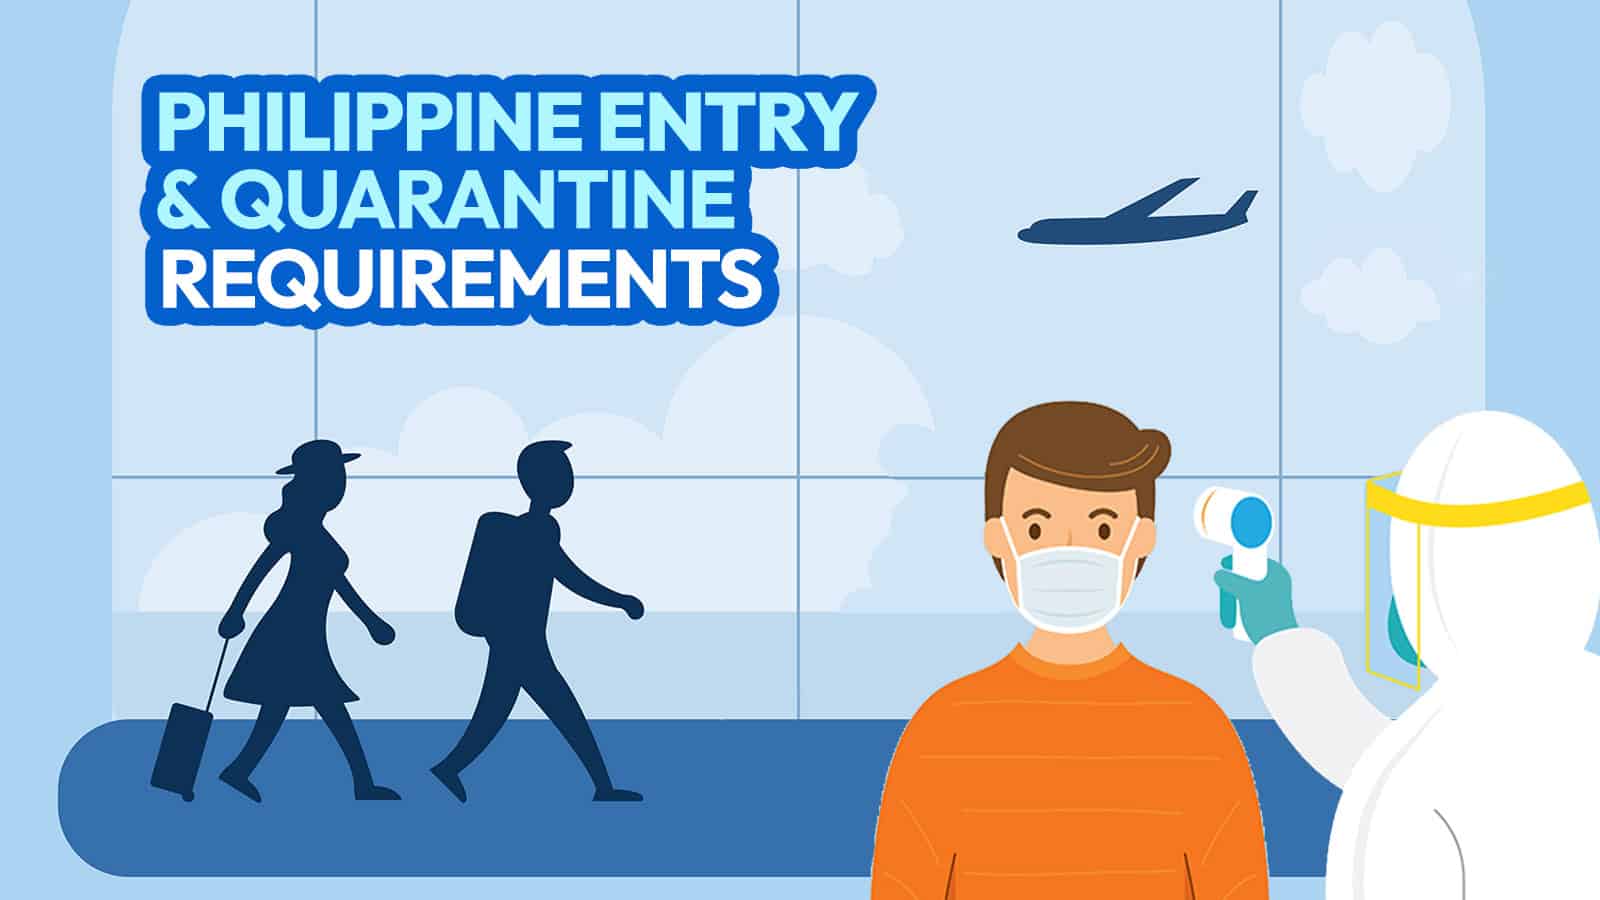 2022 PHILIPPINE ENTRY & QUARANTINE REQUIREMENTS & PROTOCOL (For Vaccinated & Unvaccinated)